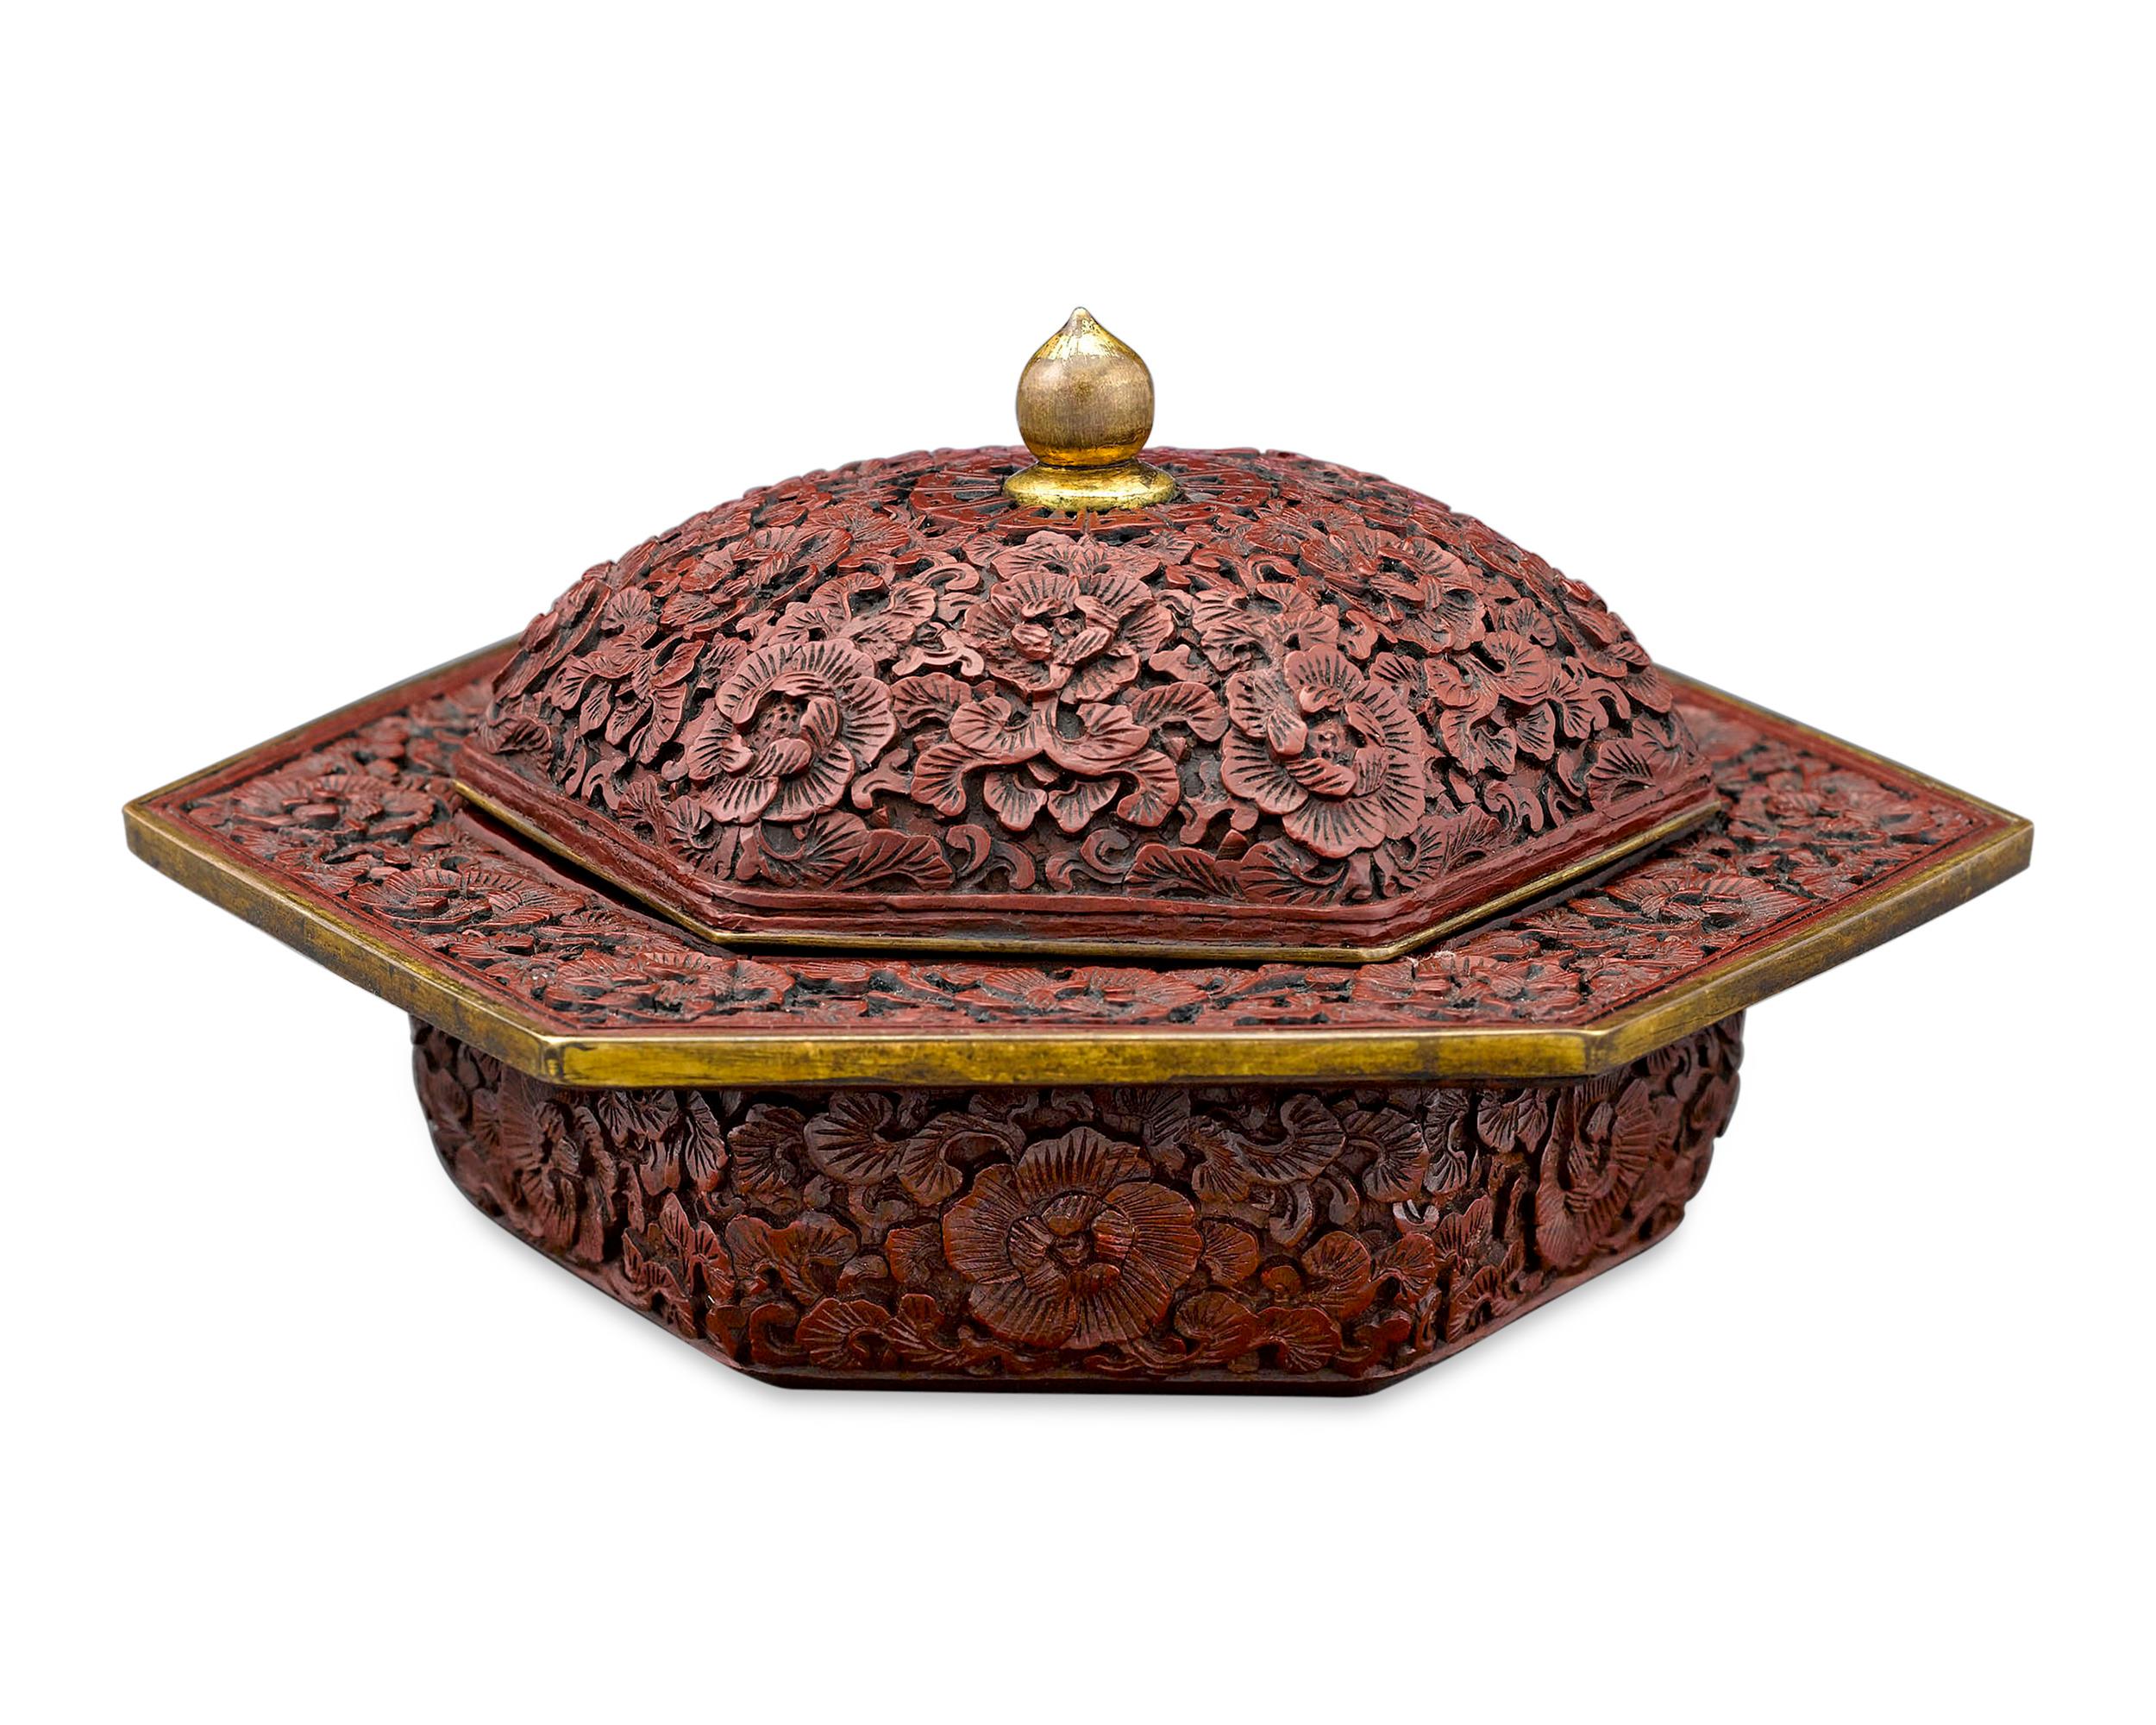 This intriguing Chinese zhadou is intricately carved of fine cinnabar lacquer. A work of exceptional artistry, this covered bowl is adorned with an intricately carved floral motif on all surfaces, including the cover and the wide rim. Also known as